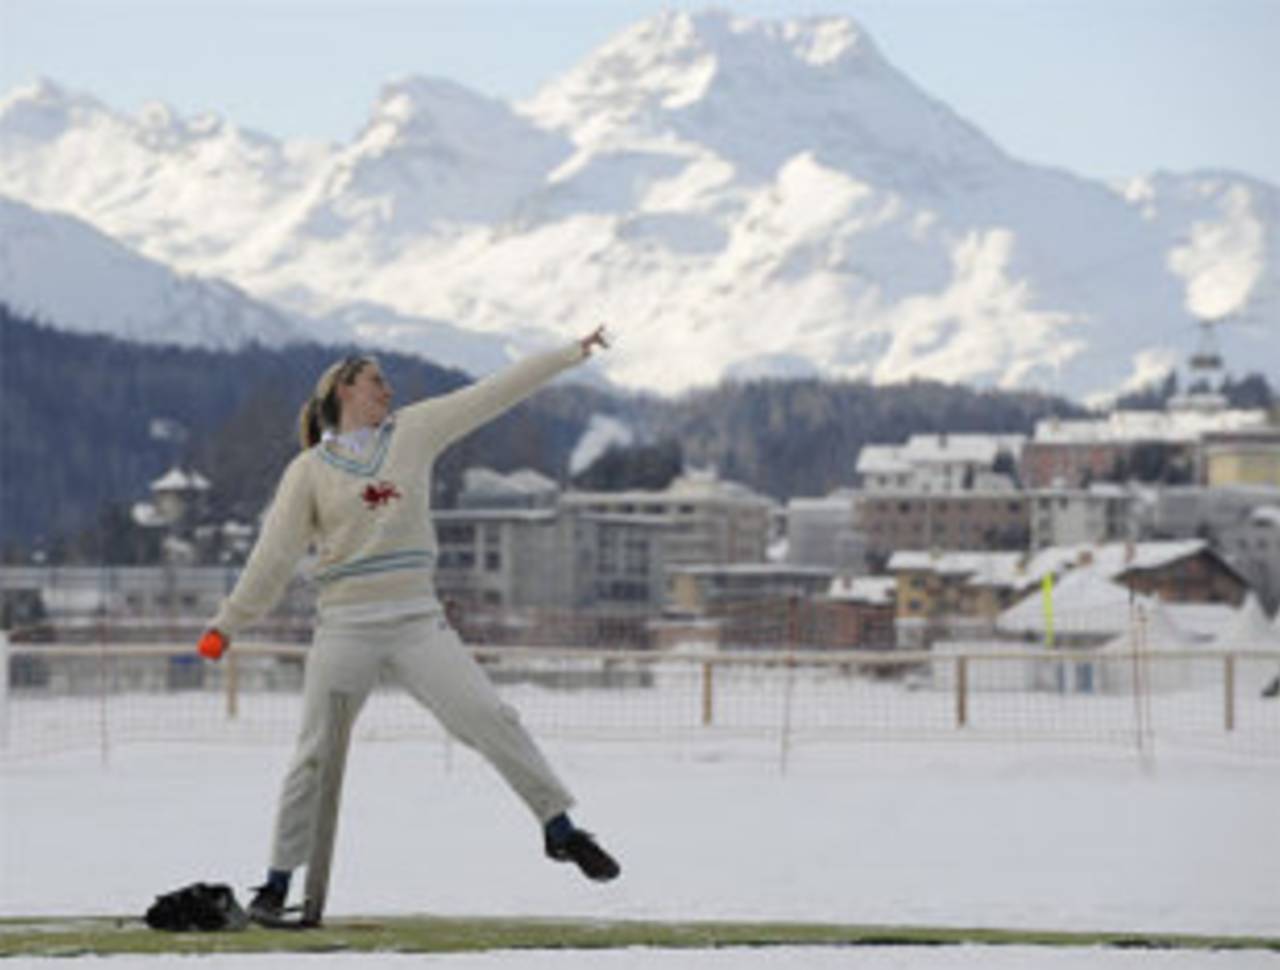 A woman prepares to bowl during 'Cricket on Ice' in Saint Moritz, this began in 1988, when a group of Britons challenged the students of the international boarding school Lyceum Alpinum Zuoz to a game, Switzerland, January 31, 2008